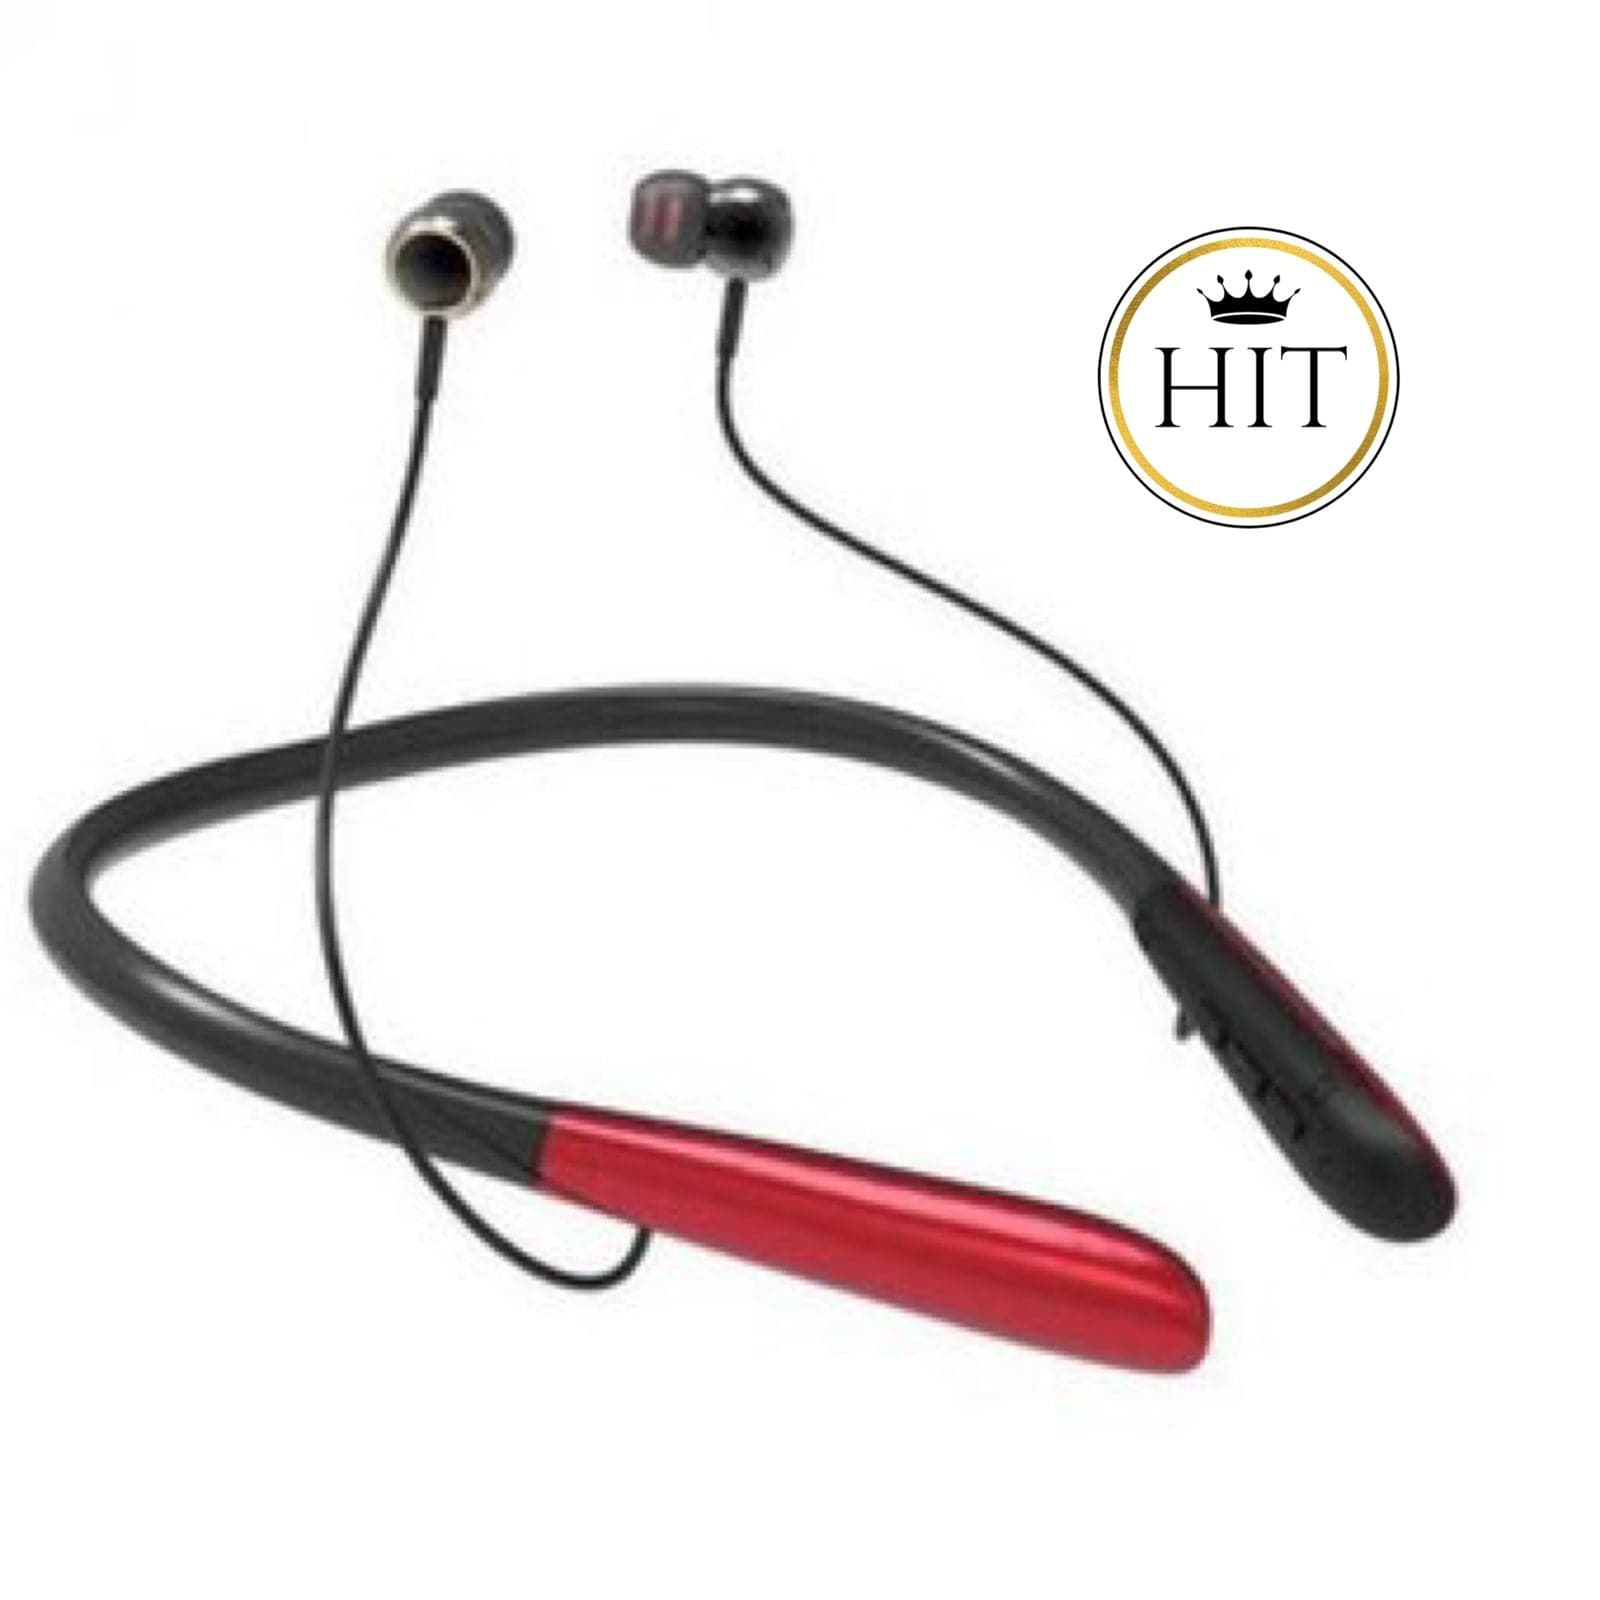 AUDIFONOS BLUETOOTH TIPO DIADEMA BT-13 - colombiahit